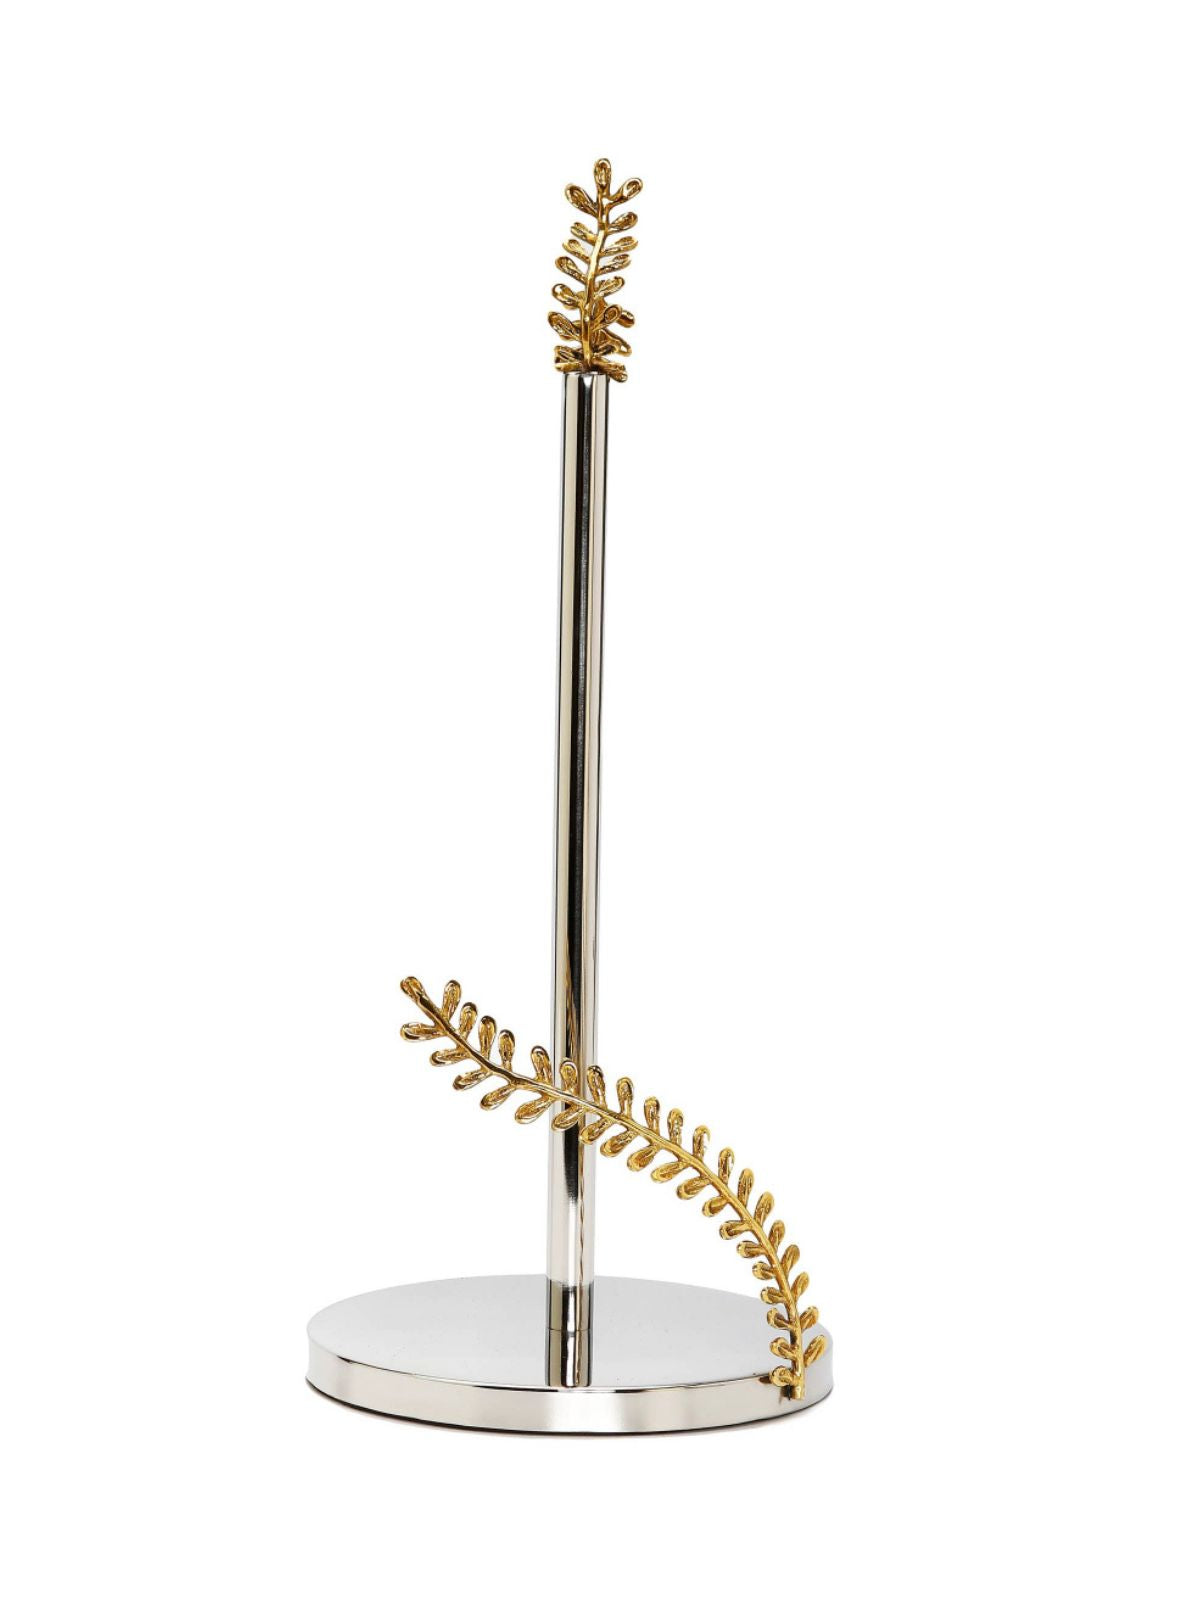 15H Silver Paper Towel Holder With Luxury Gold Brass Leaf Design sold by KYA Home Decor.